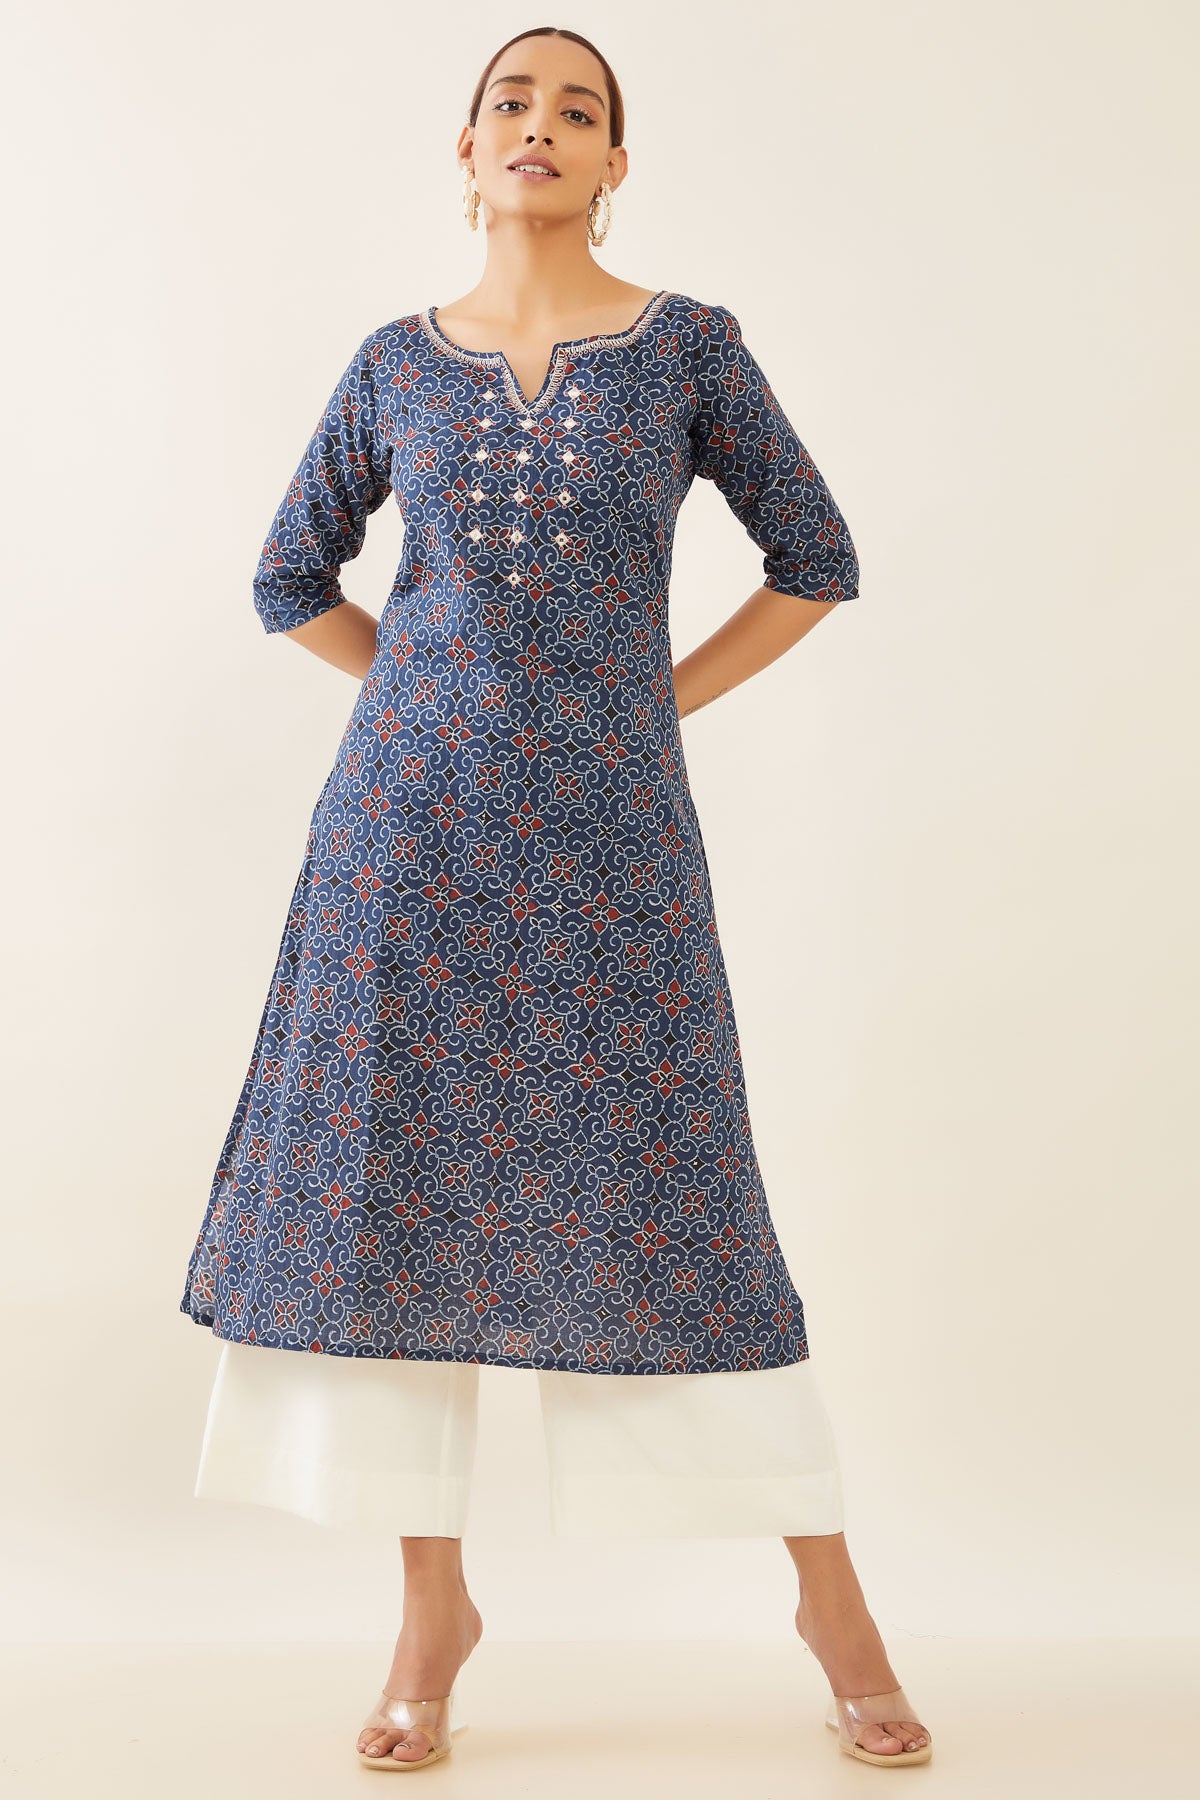 All Over Floral Printed & Foil Mirror Embroidered Kurta - Blue